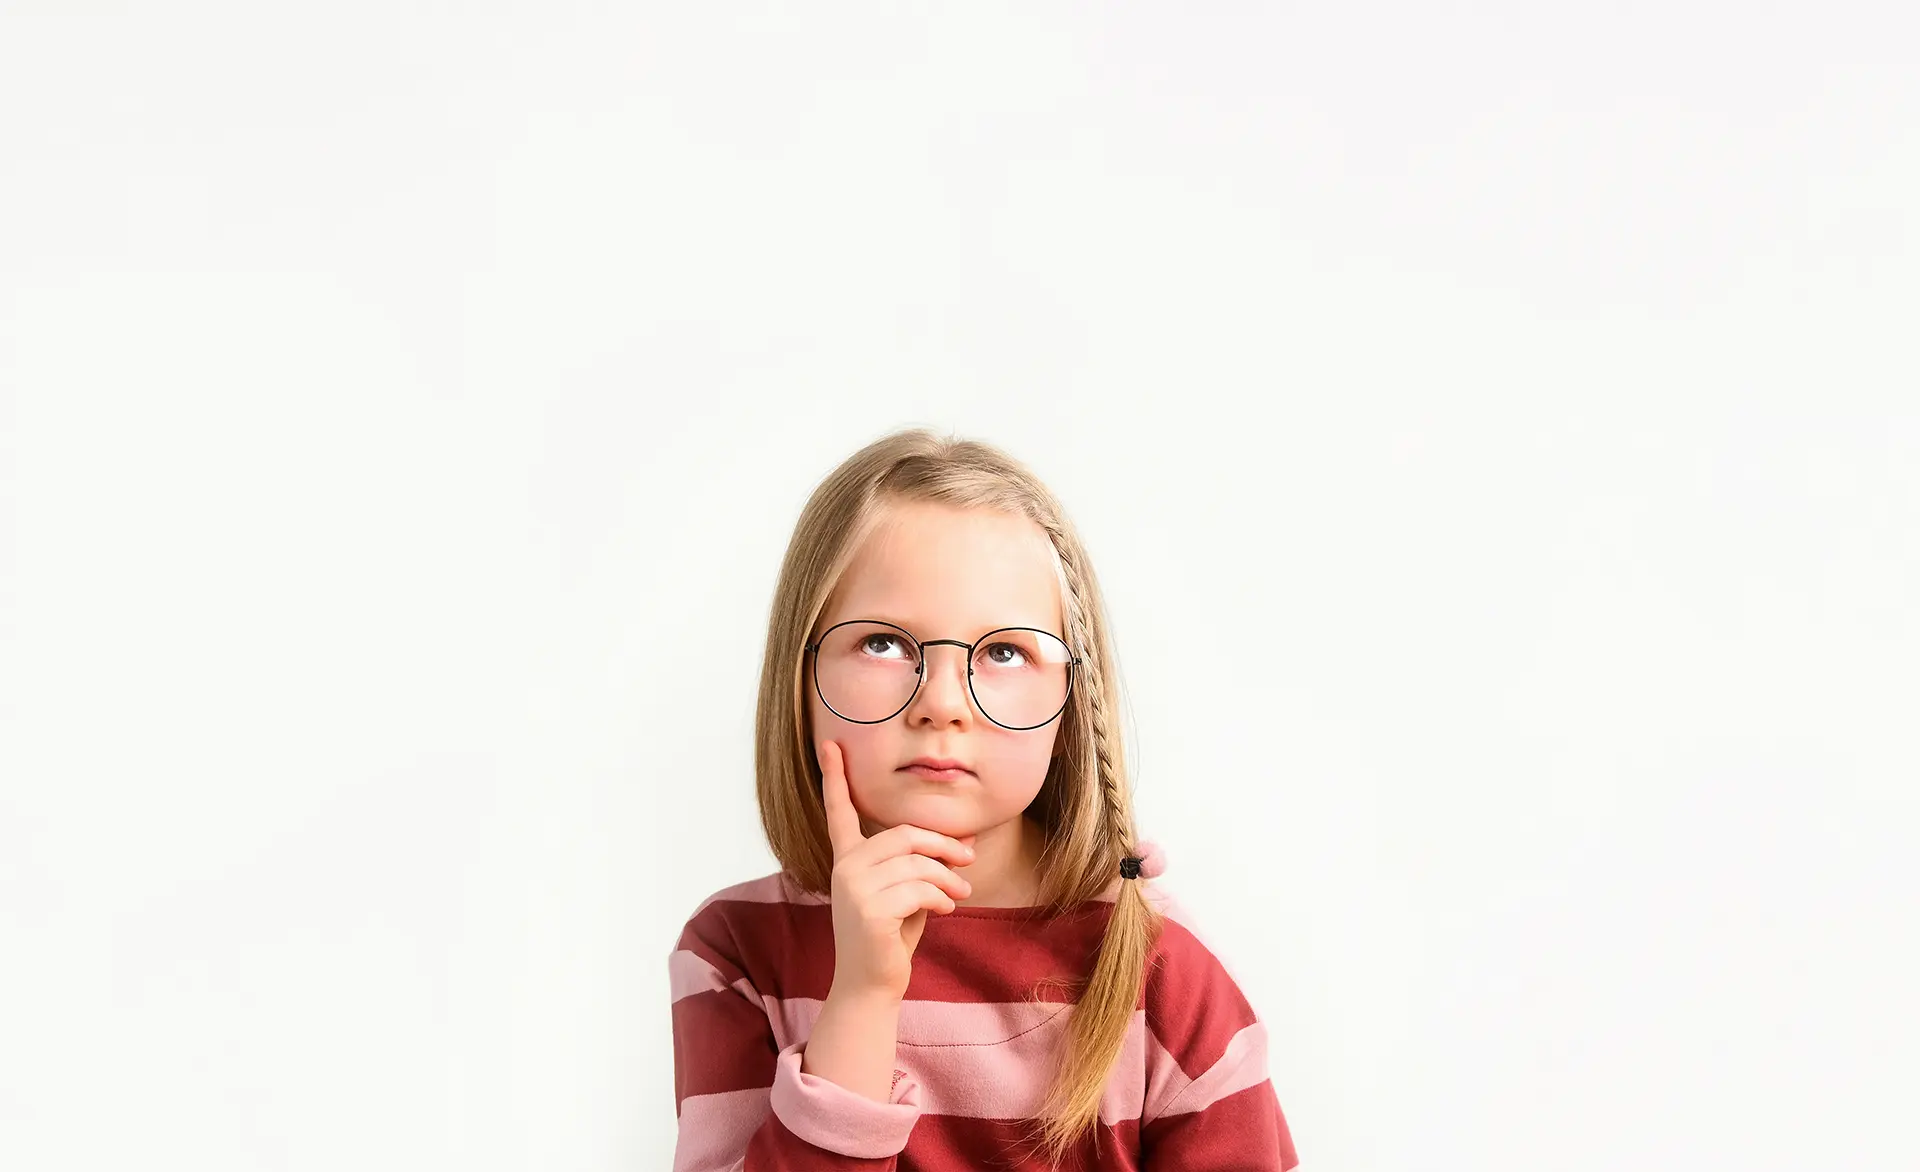 A little girl with glasses on her face.